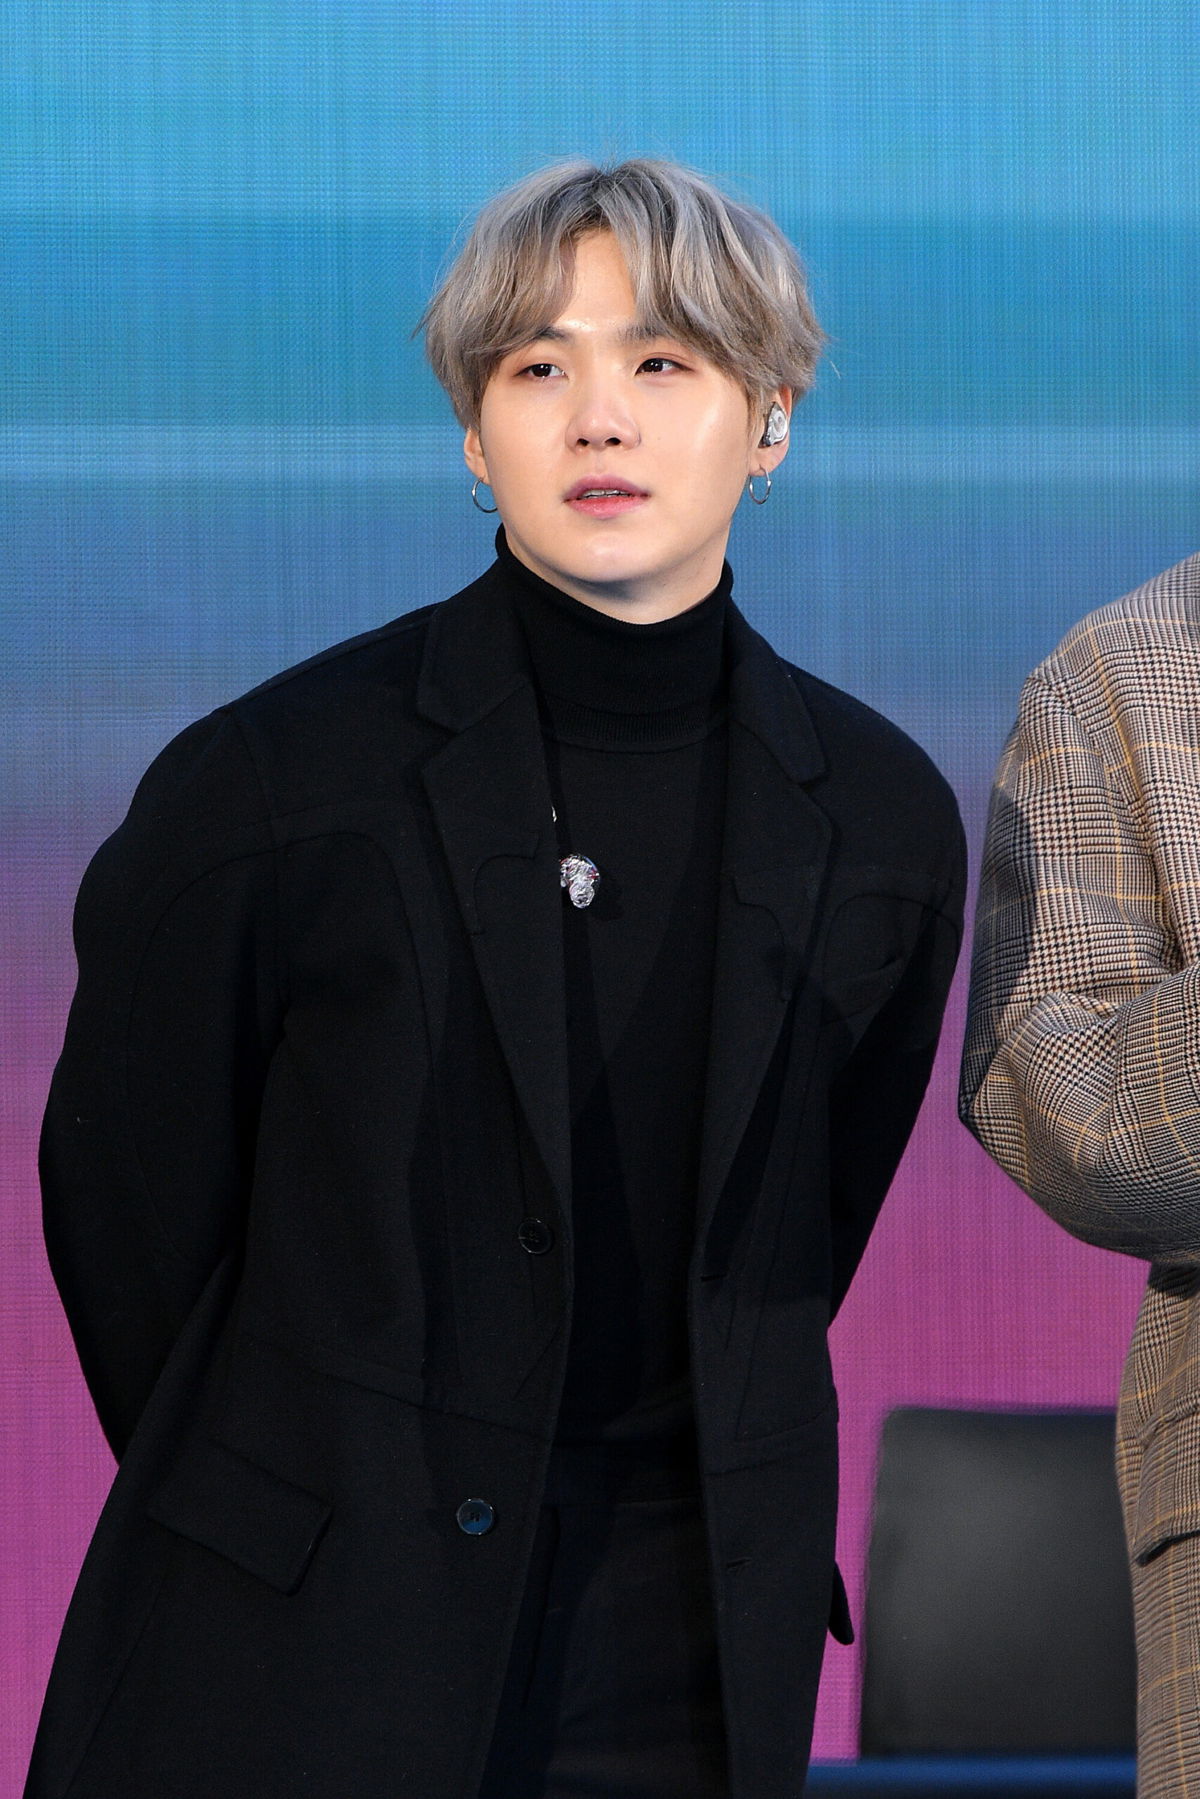 <i>Dia Dipasupil/Getty Images North America/Getty Images</i><br/>Suga of the K-pop boy band BTS